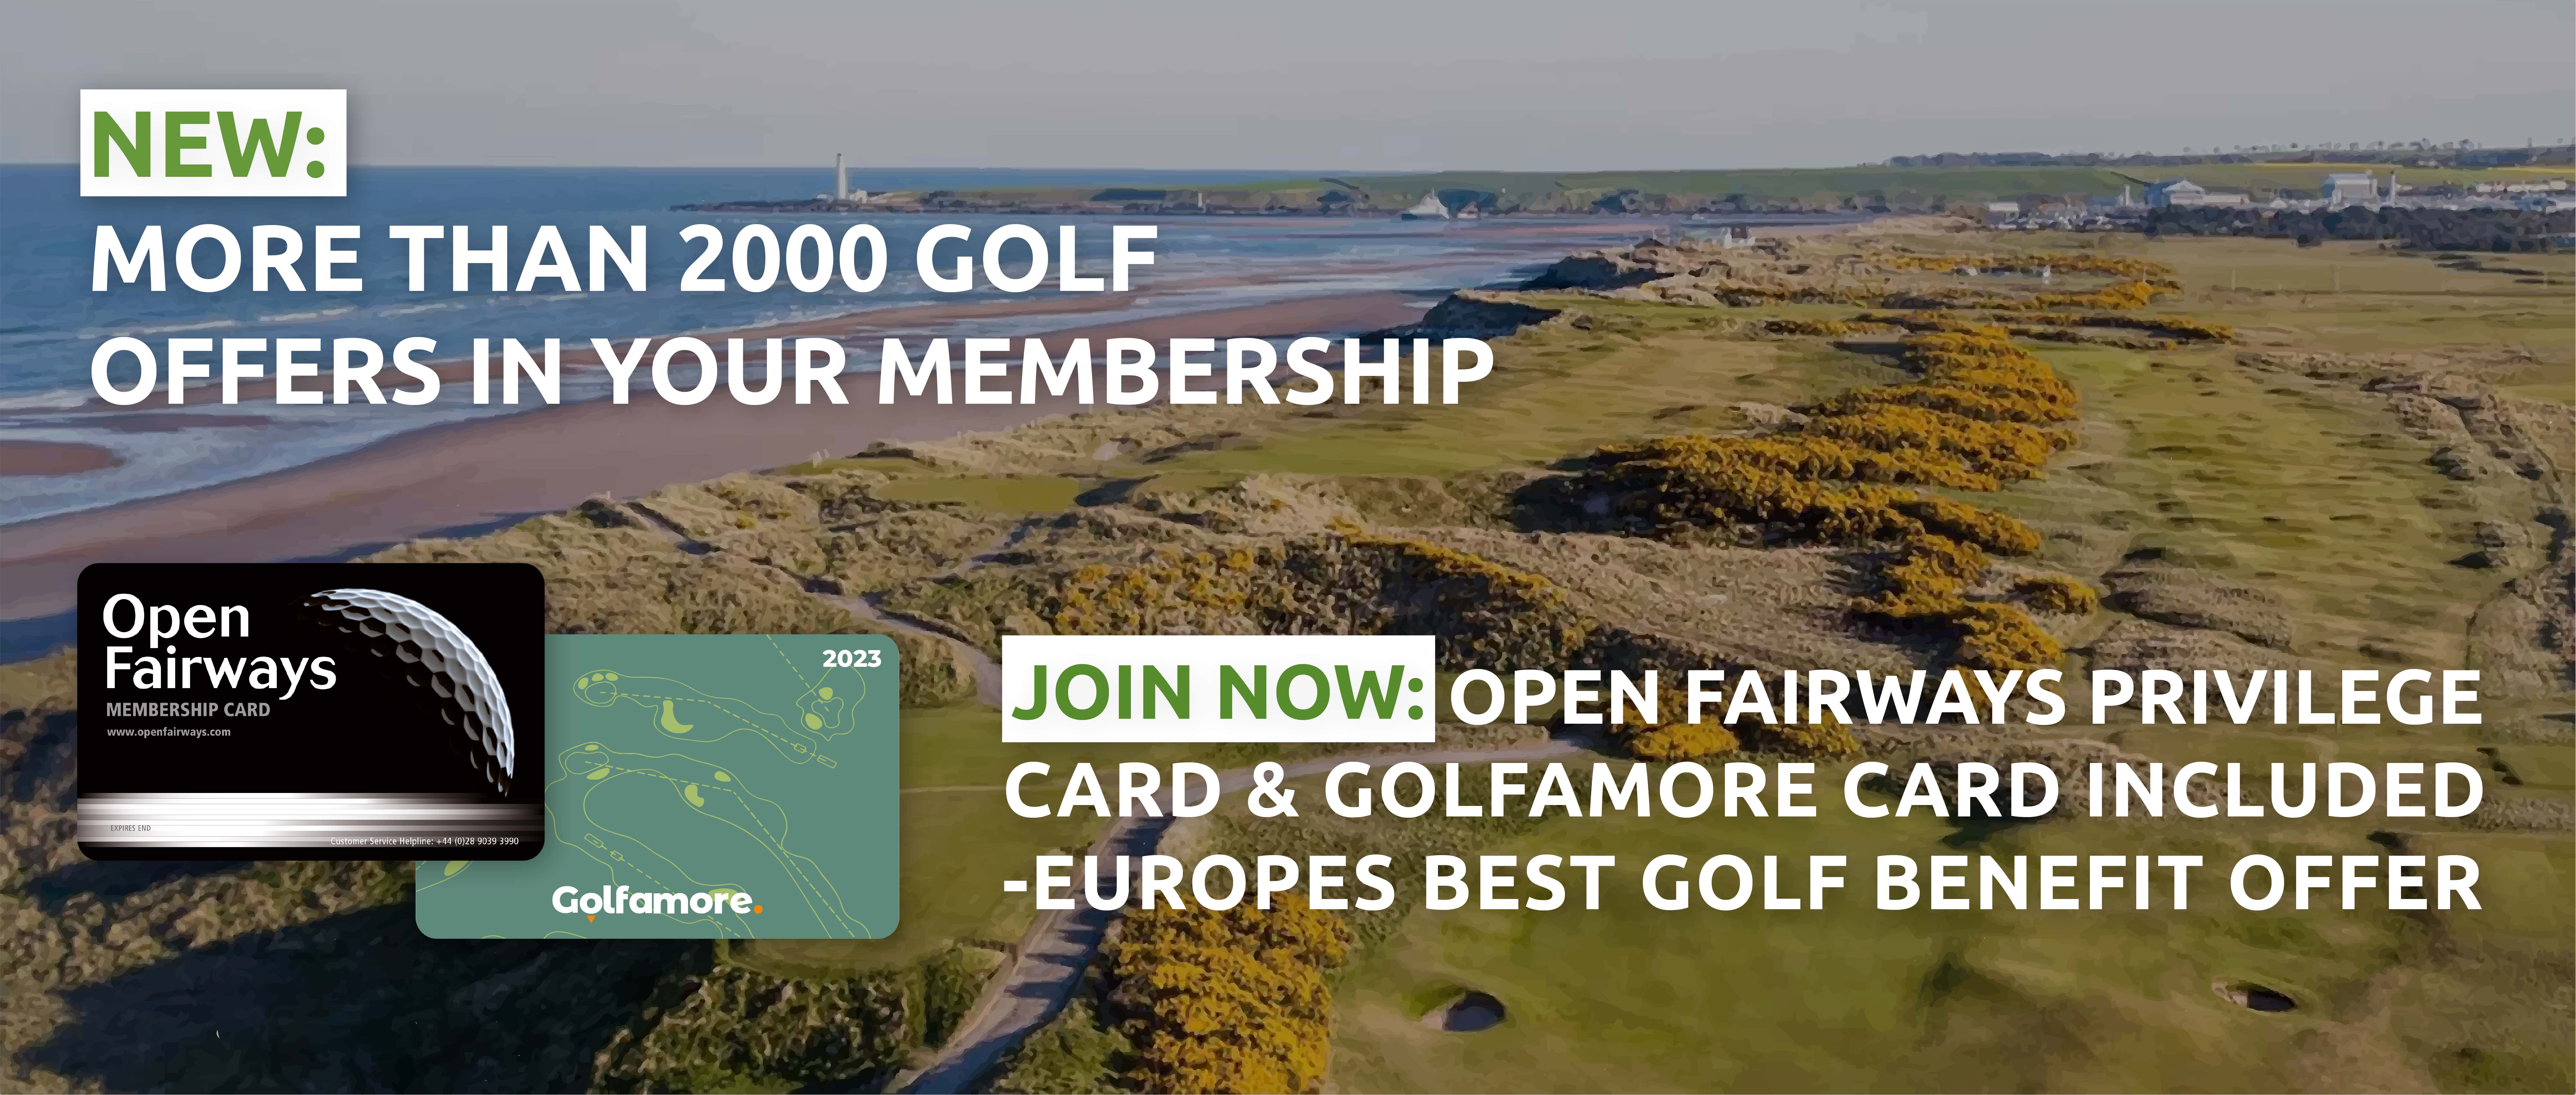 Golfamore + Open Fairways  2000 great golf offers for you.